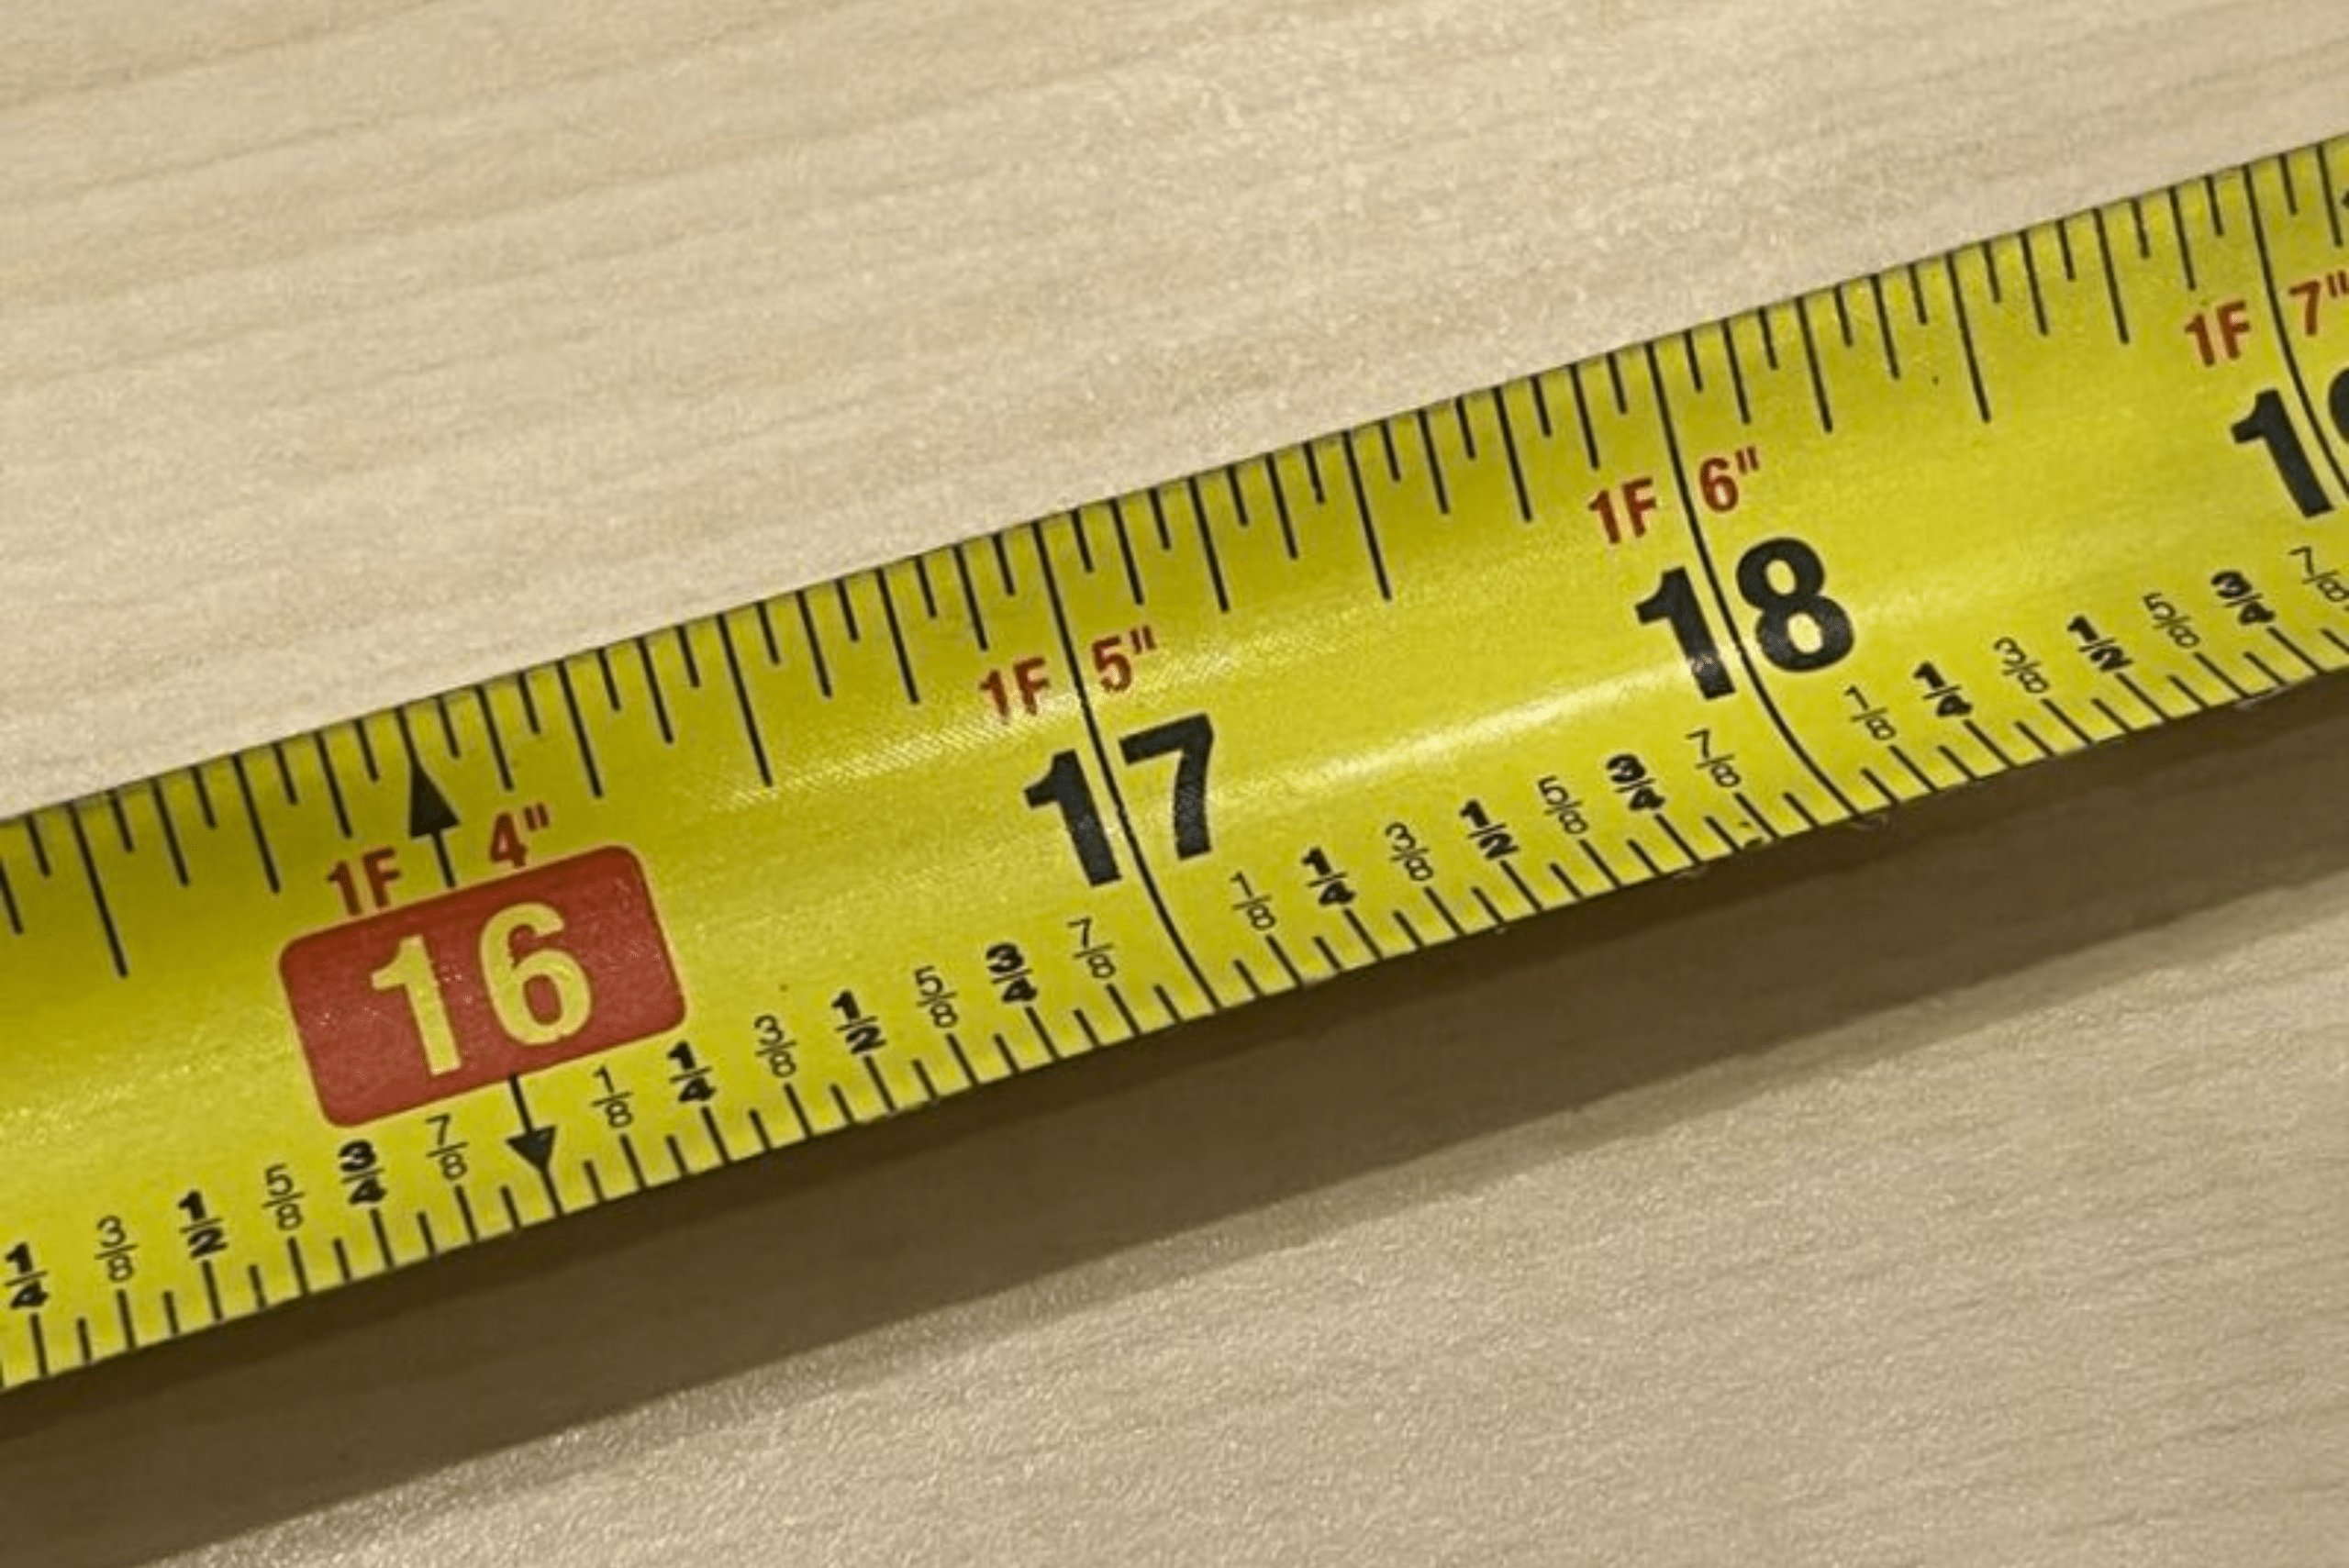 A tape measure marks with red highlight on 16 inches.